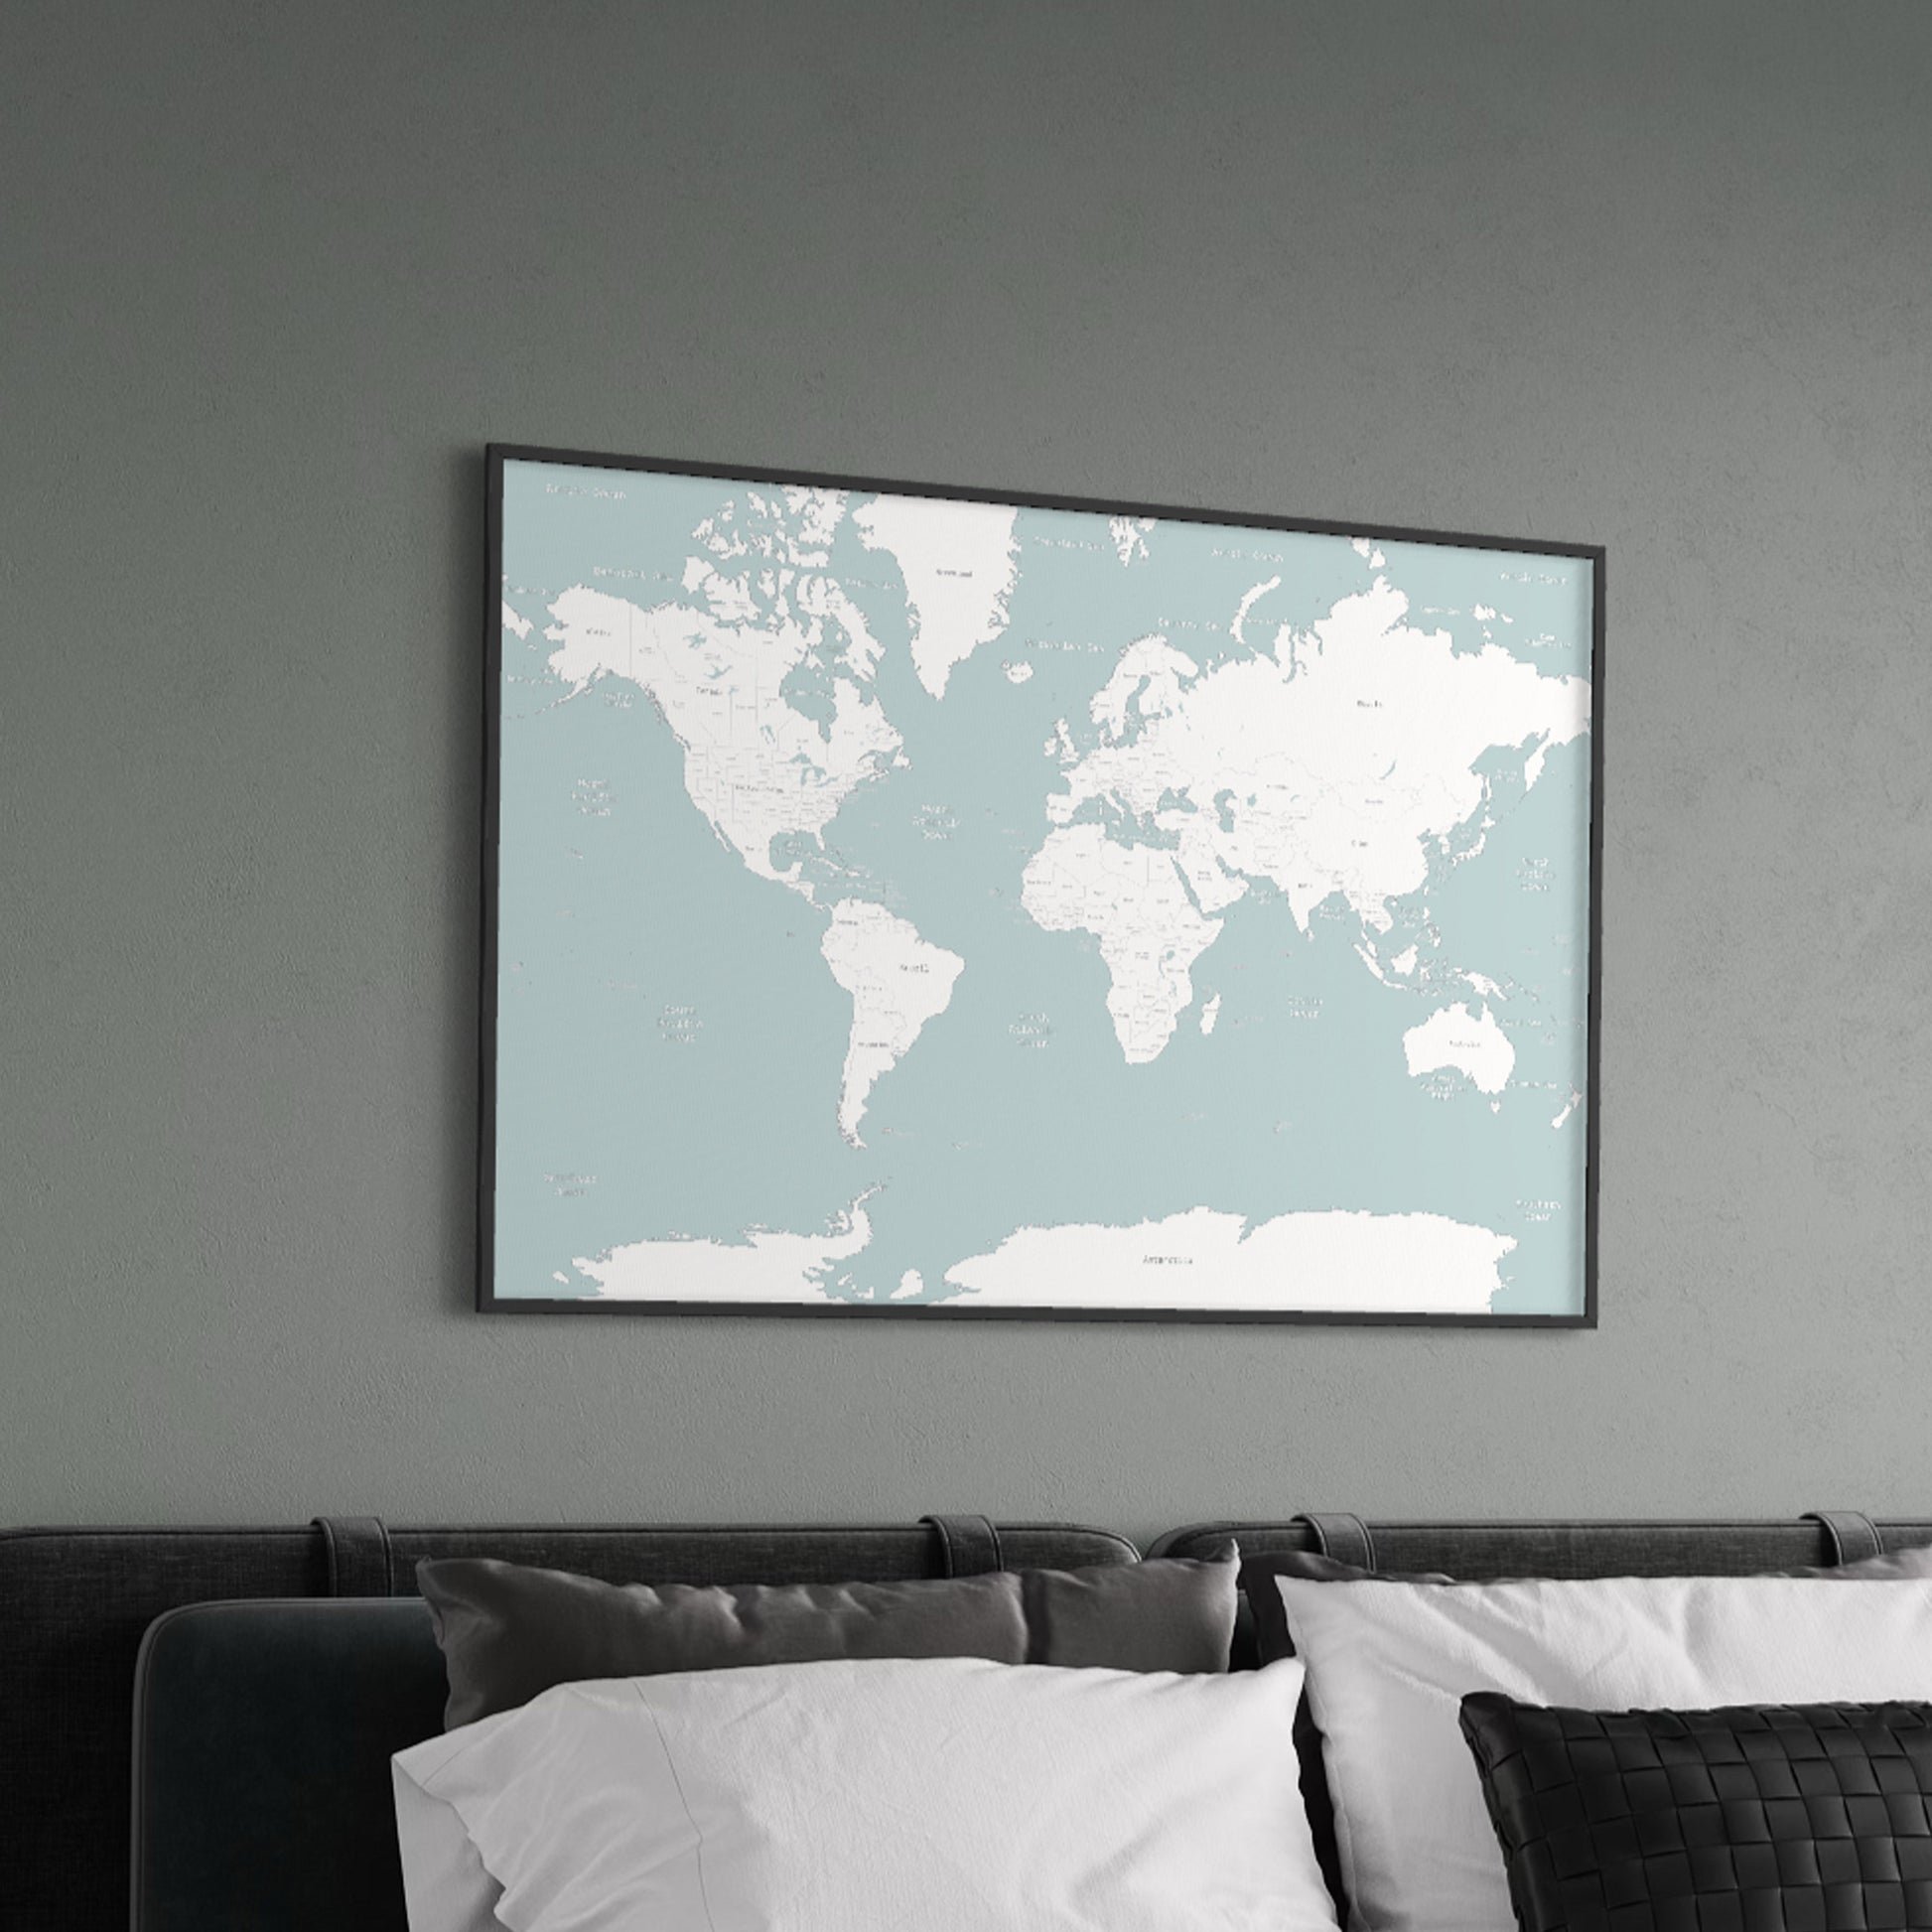 Pale Blue Map of the World Poster Print on Wall Above Bed